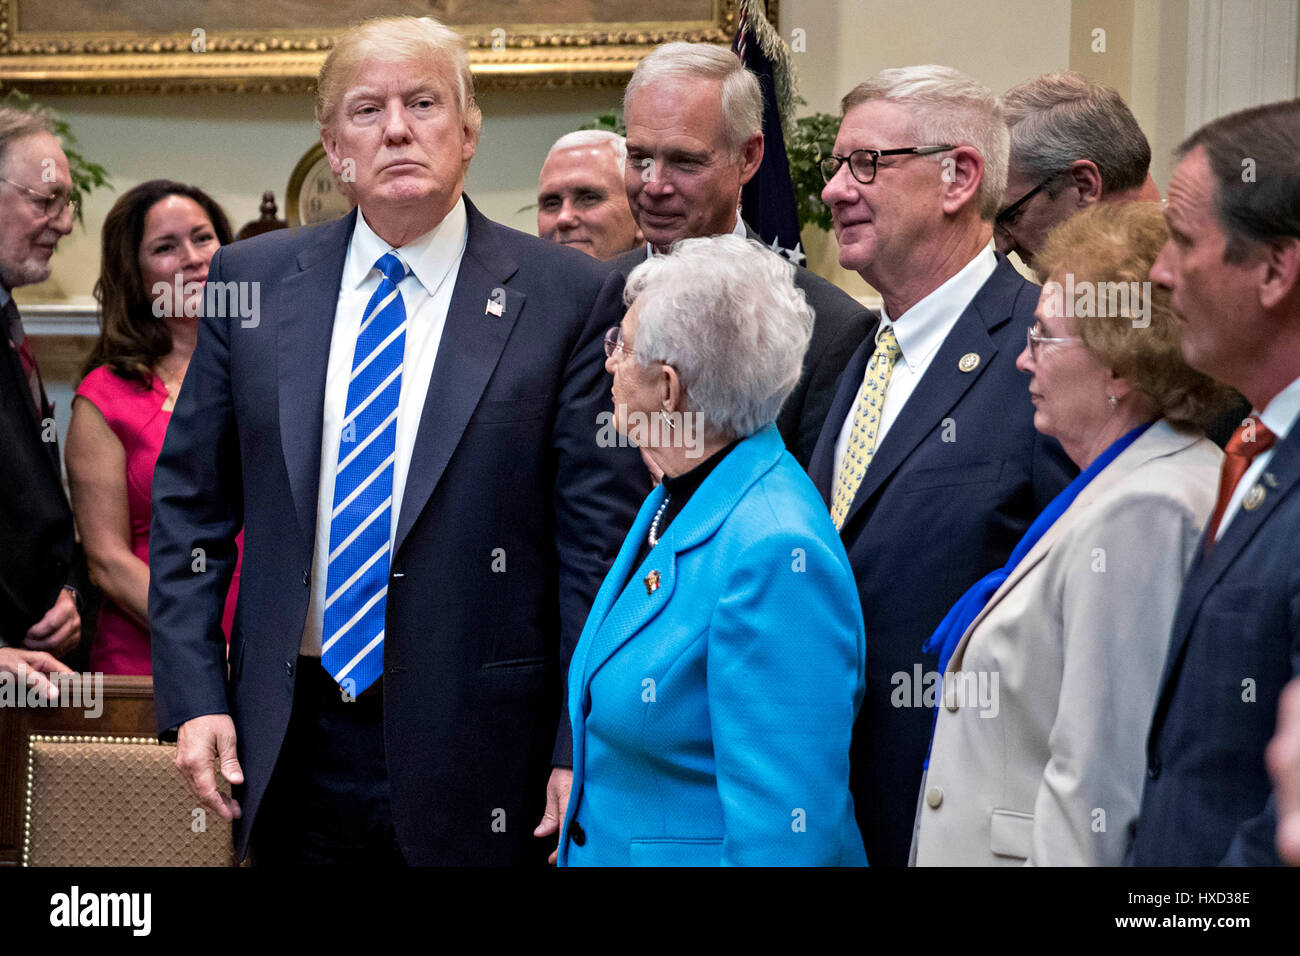 Washington DC, USA. 27th March, 2017. United States President Donald Trump, left, stands after signing bills in the Roosevelt Room of the White House in Washington, DC, U.S., on Monday, March 27, 2017. Trump signed four bills, H.J. Res 37, H.J. Res 44, H.J. Res. 57 and H.J. Res. 58, that nullify measures put in place during former President Barack Obama's administration. Credit: MediaPunch Inc/Alamy Live News Stock Photo